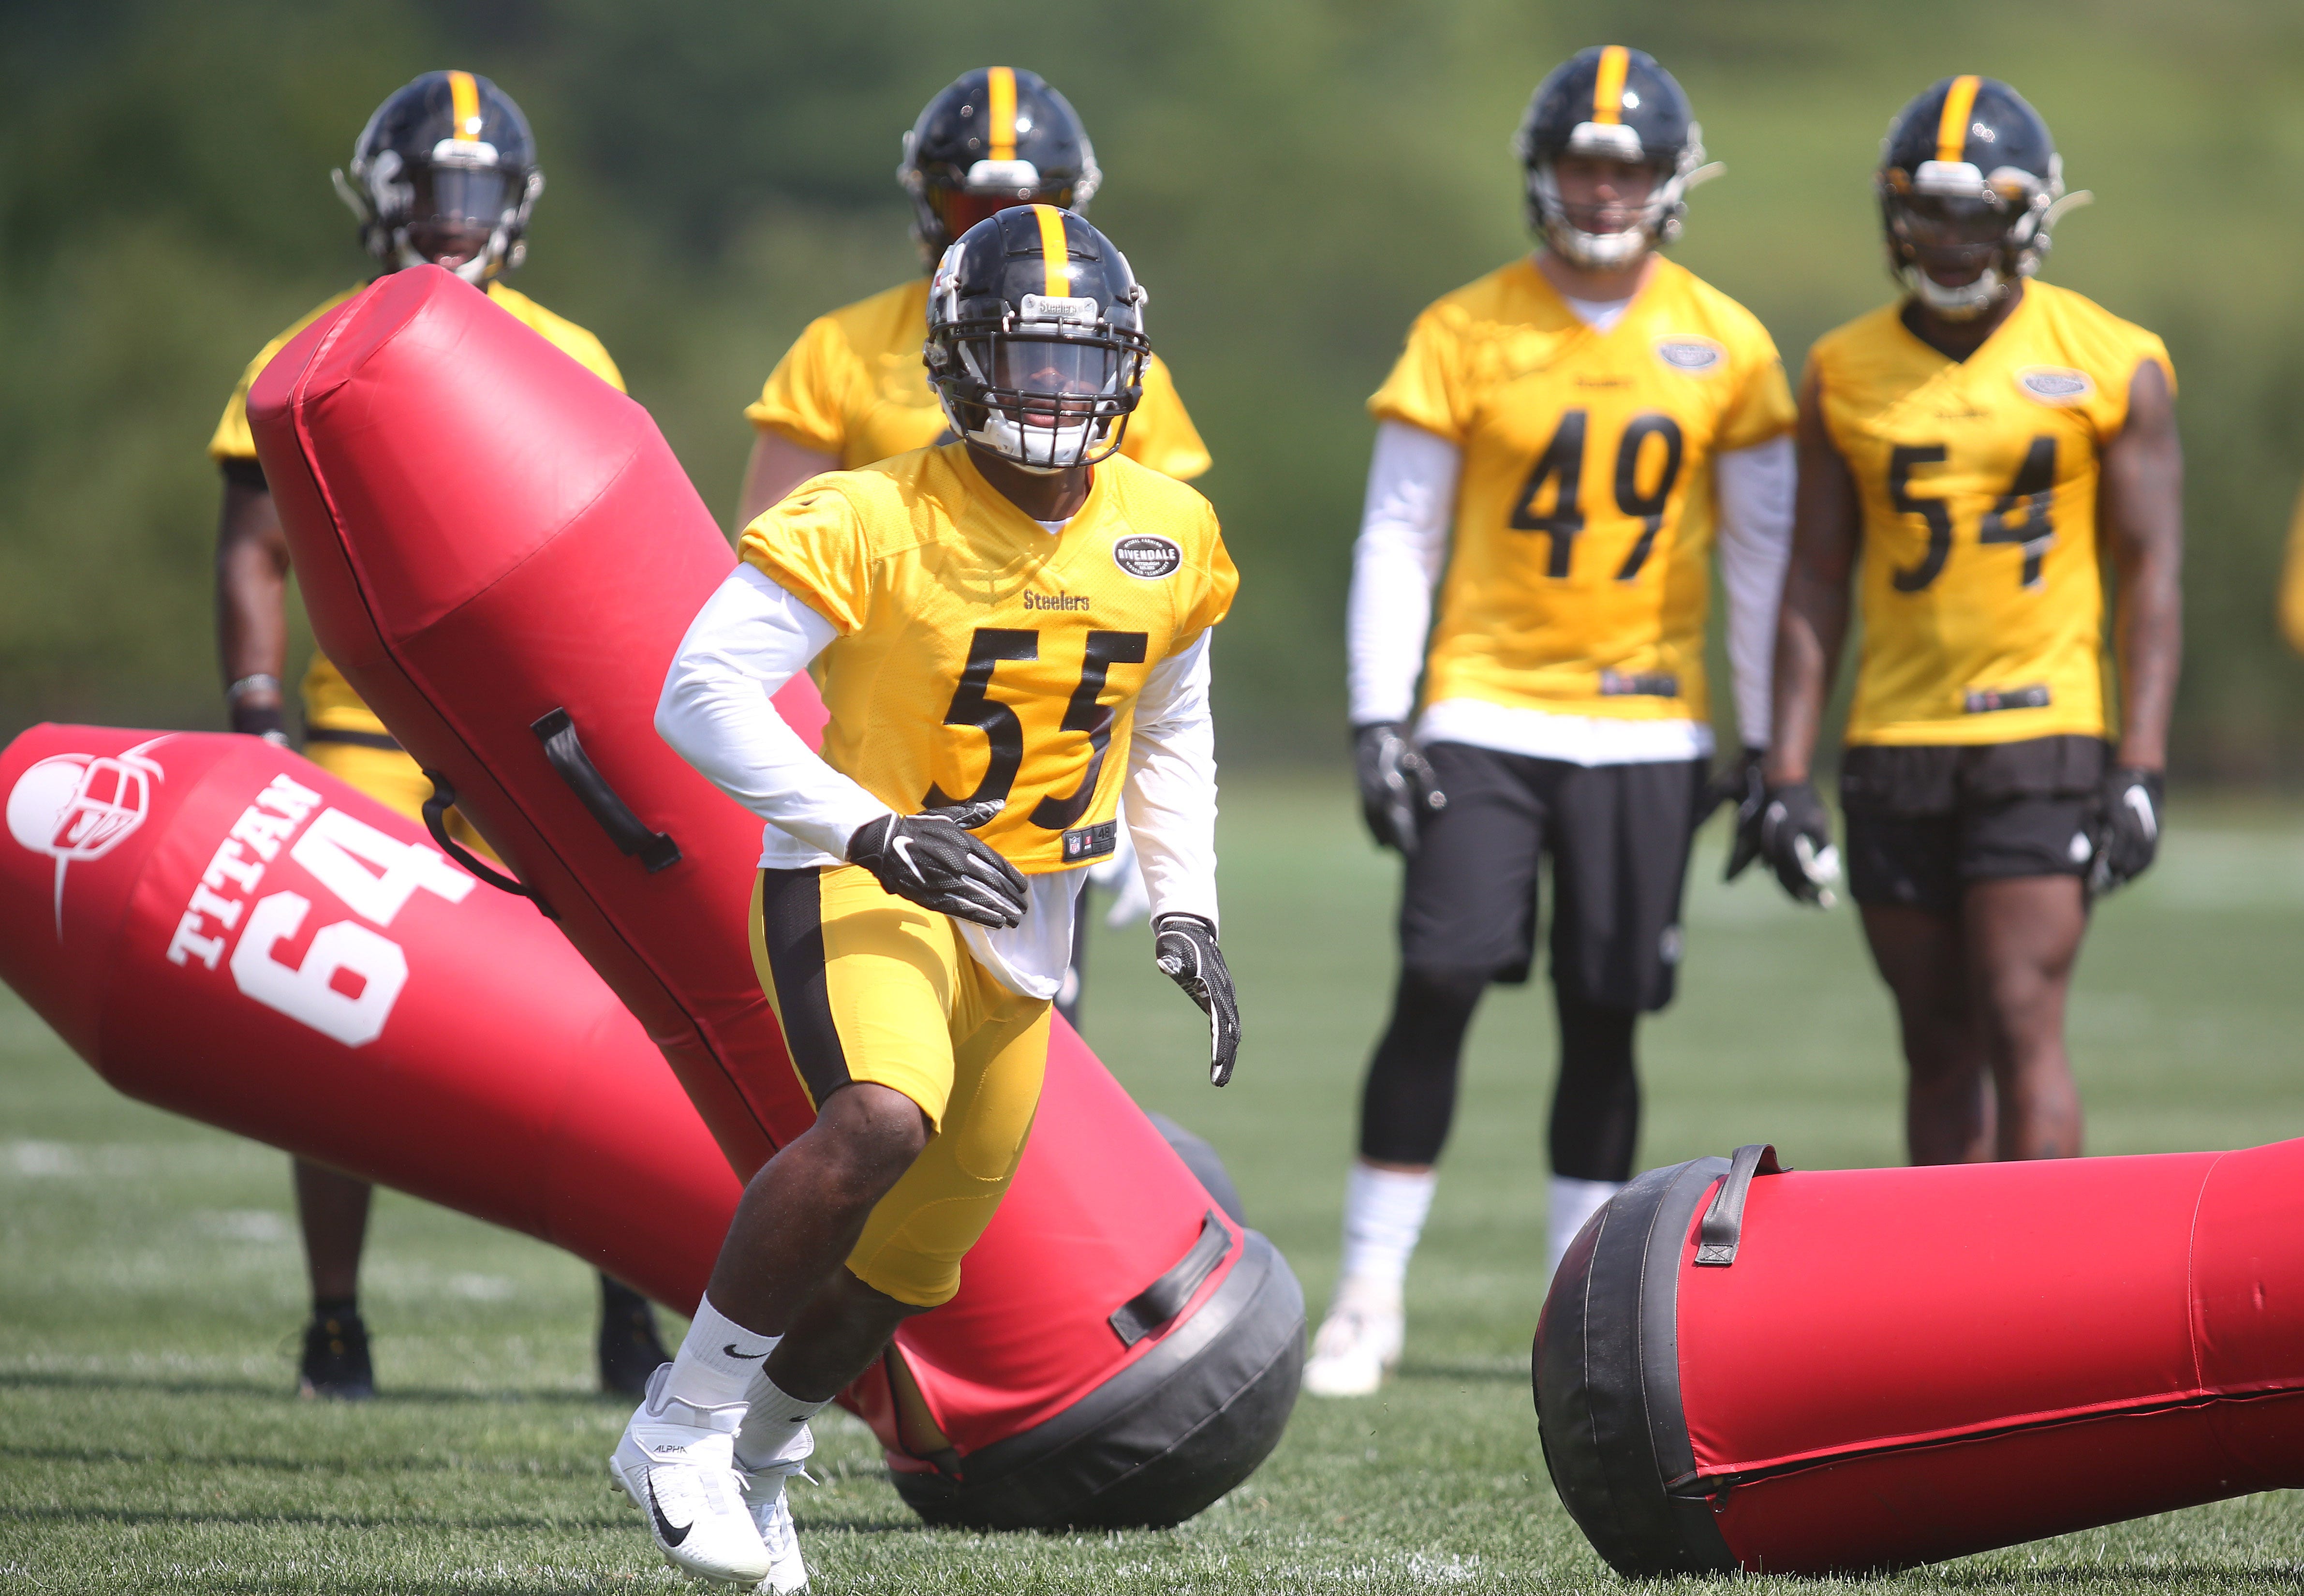 Opinion: Pittsburgh Steelers' LB Devin Bush has more pressure than most NFL rookies to succeed